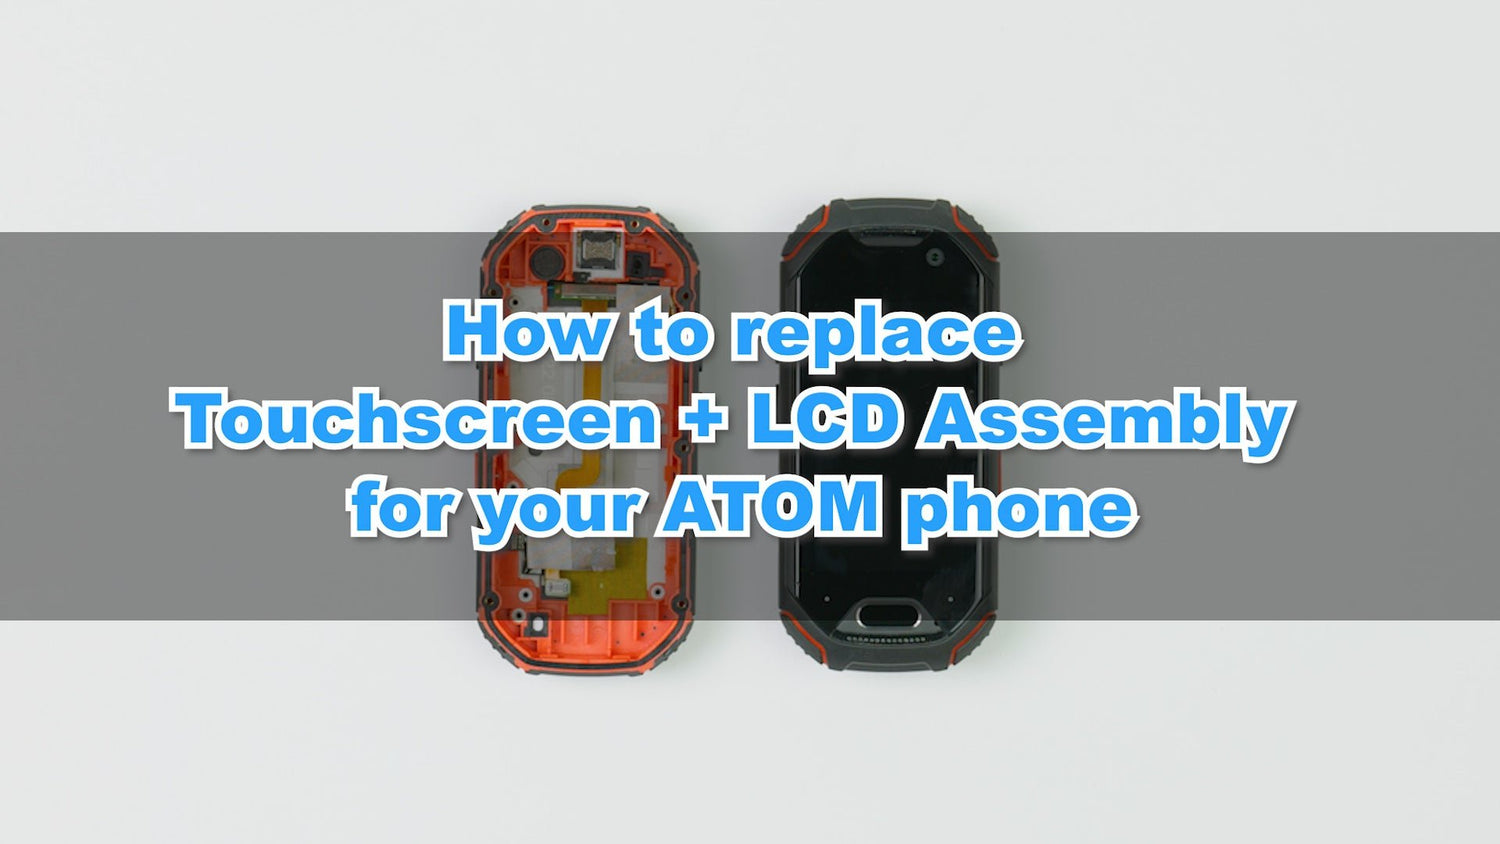 Unihertz Atom Touchscreen and LCD Assembly Replacement Tutorial - Unihertz